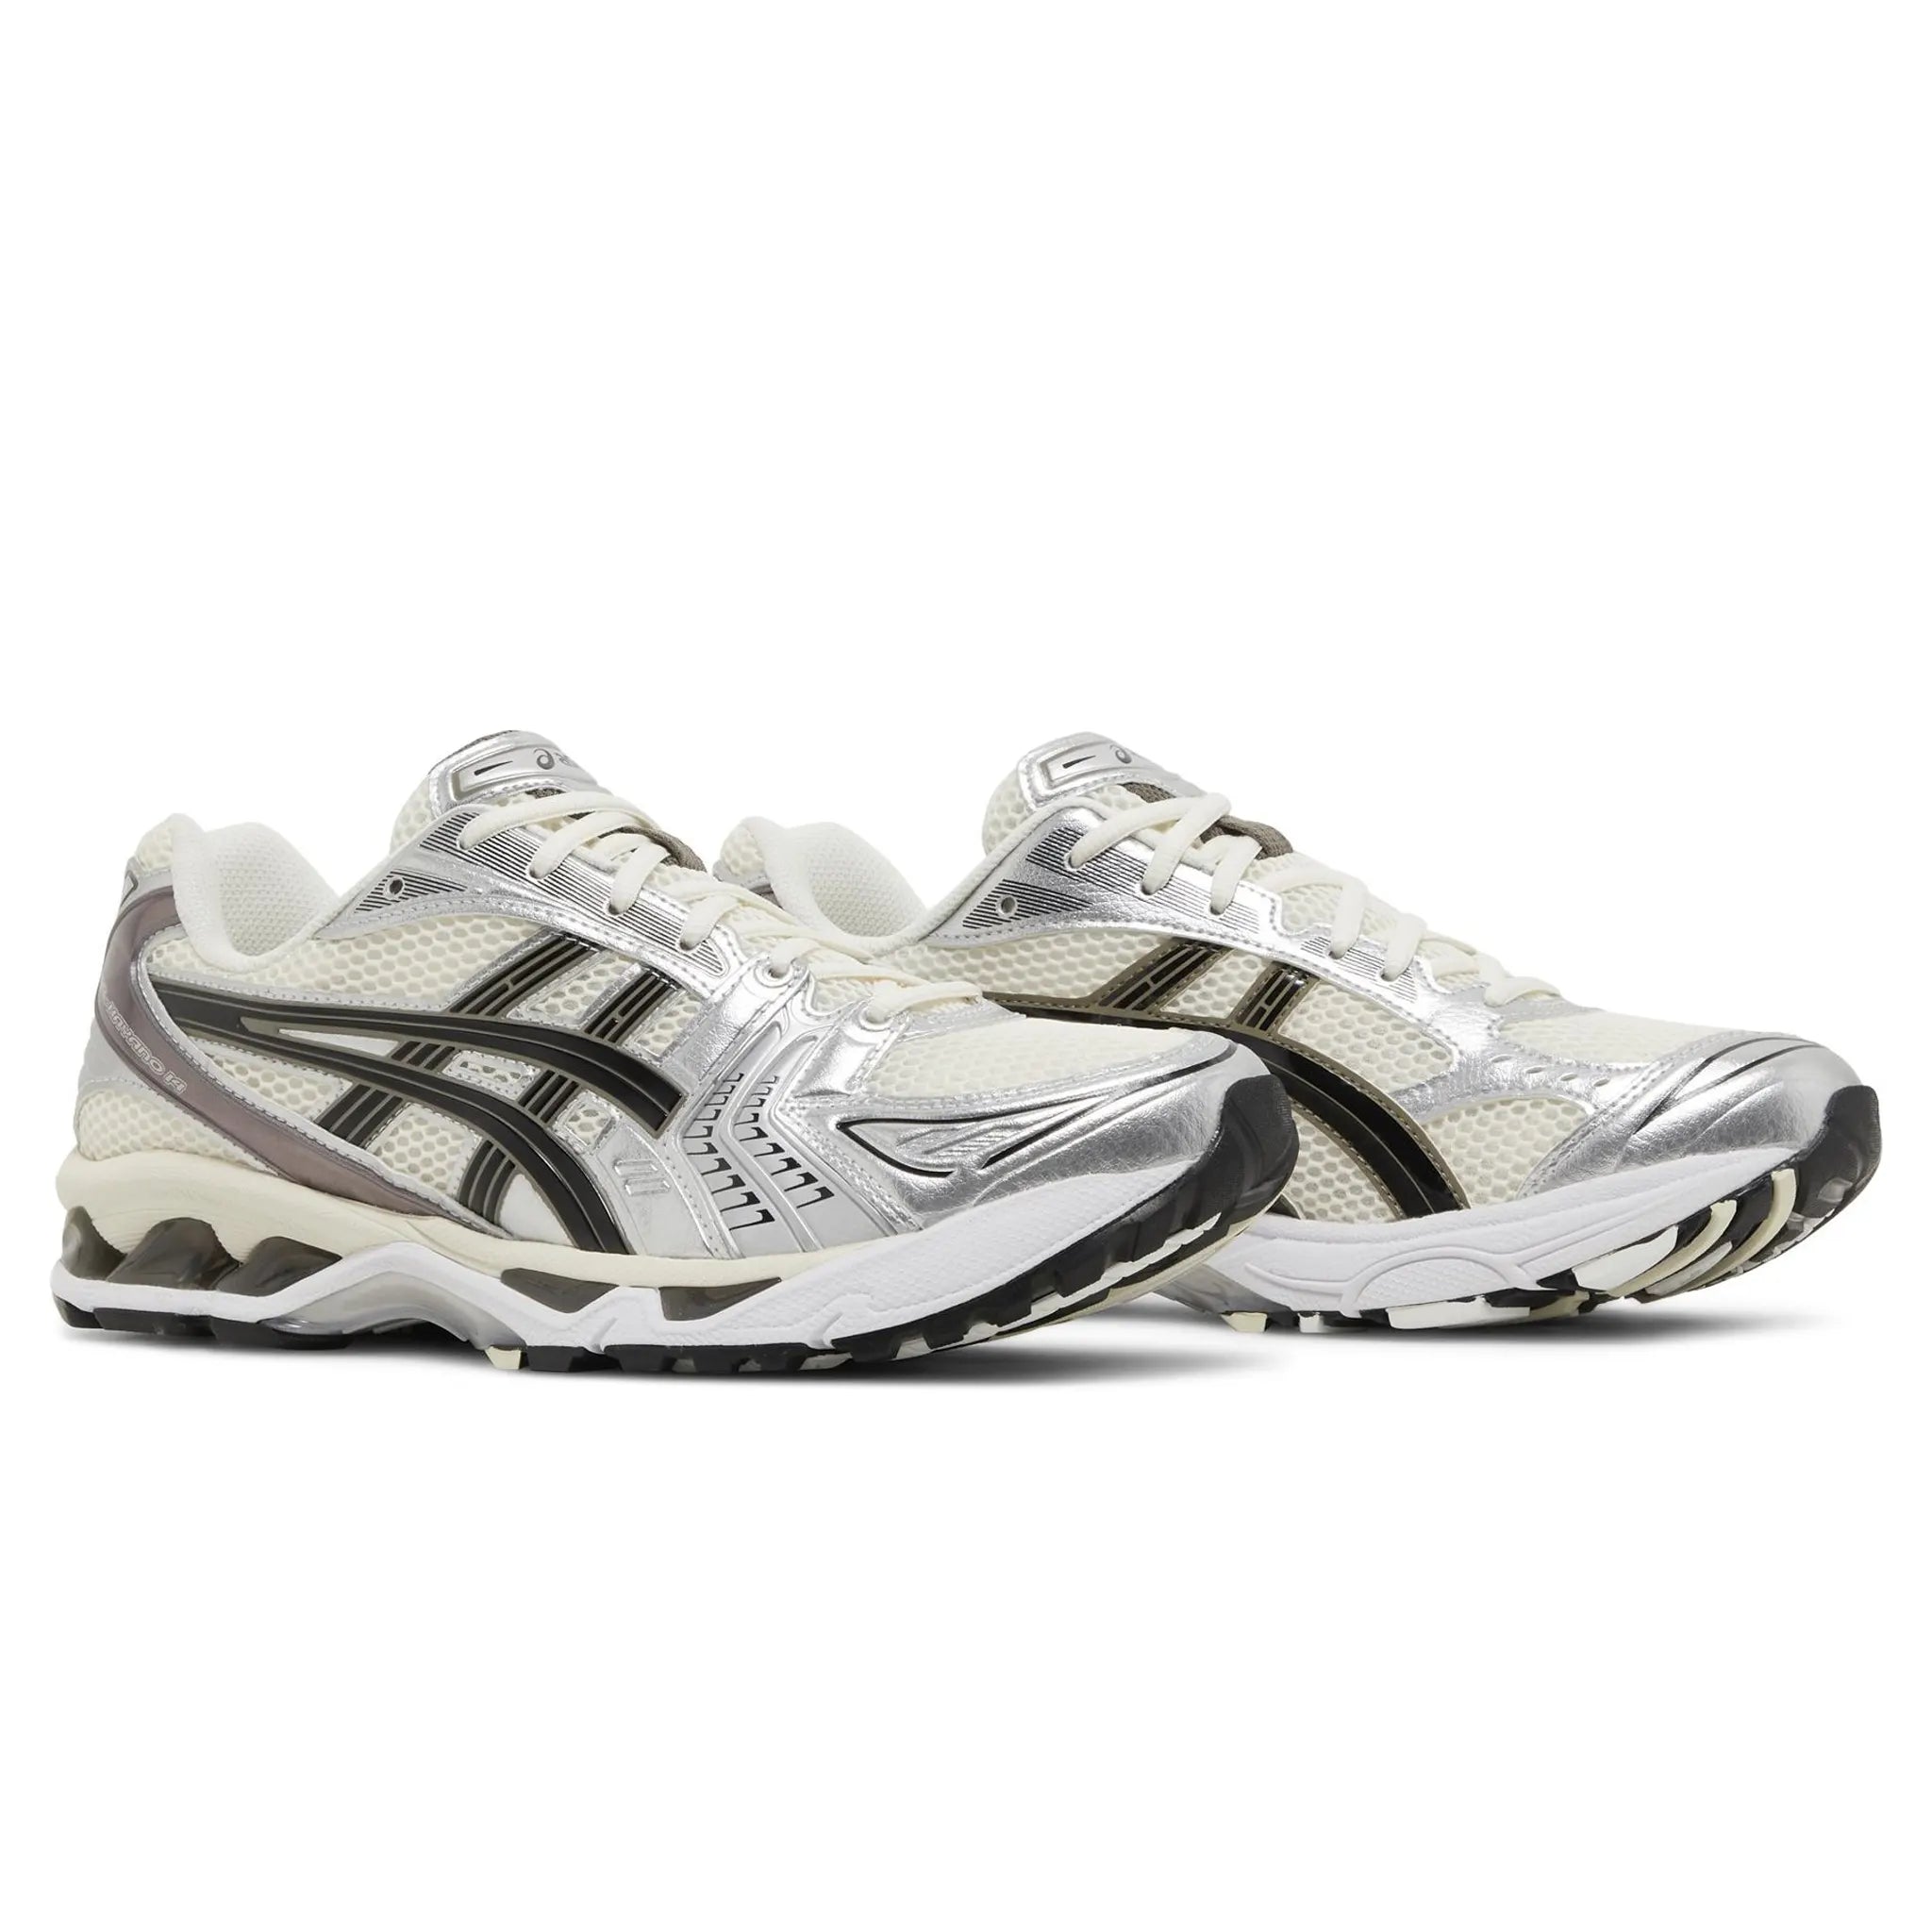 Front side view of ASICS Gel-Kayano 14 Silver Cream 1201A019-108